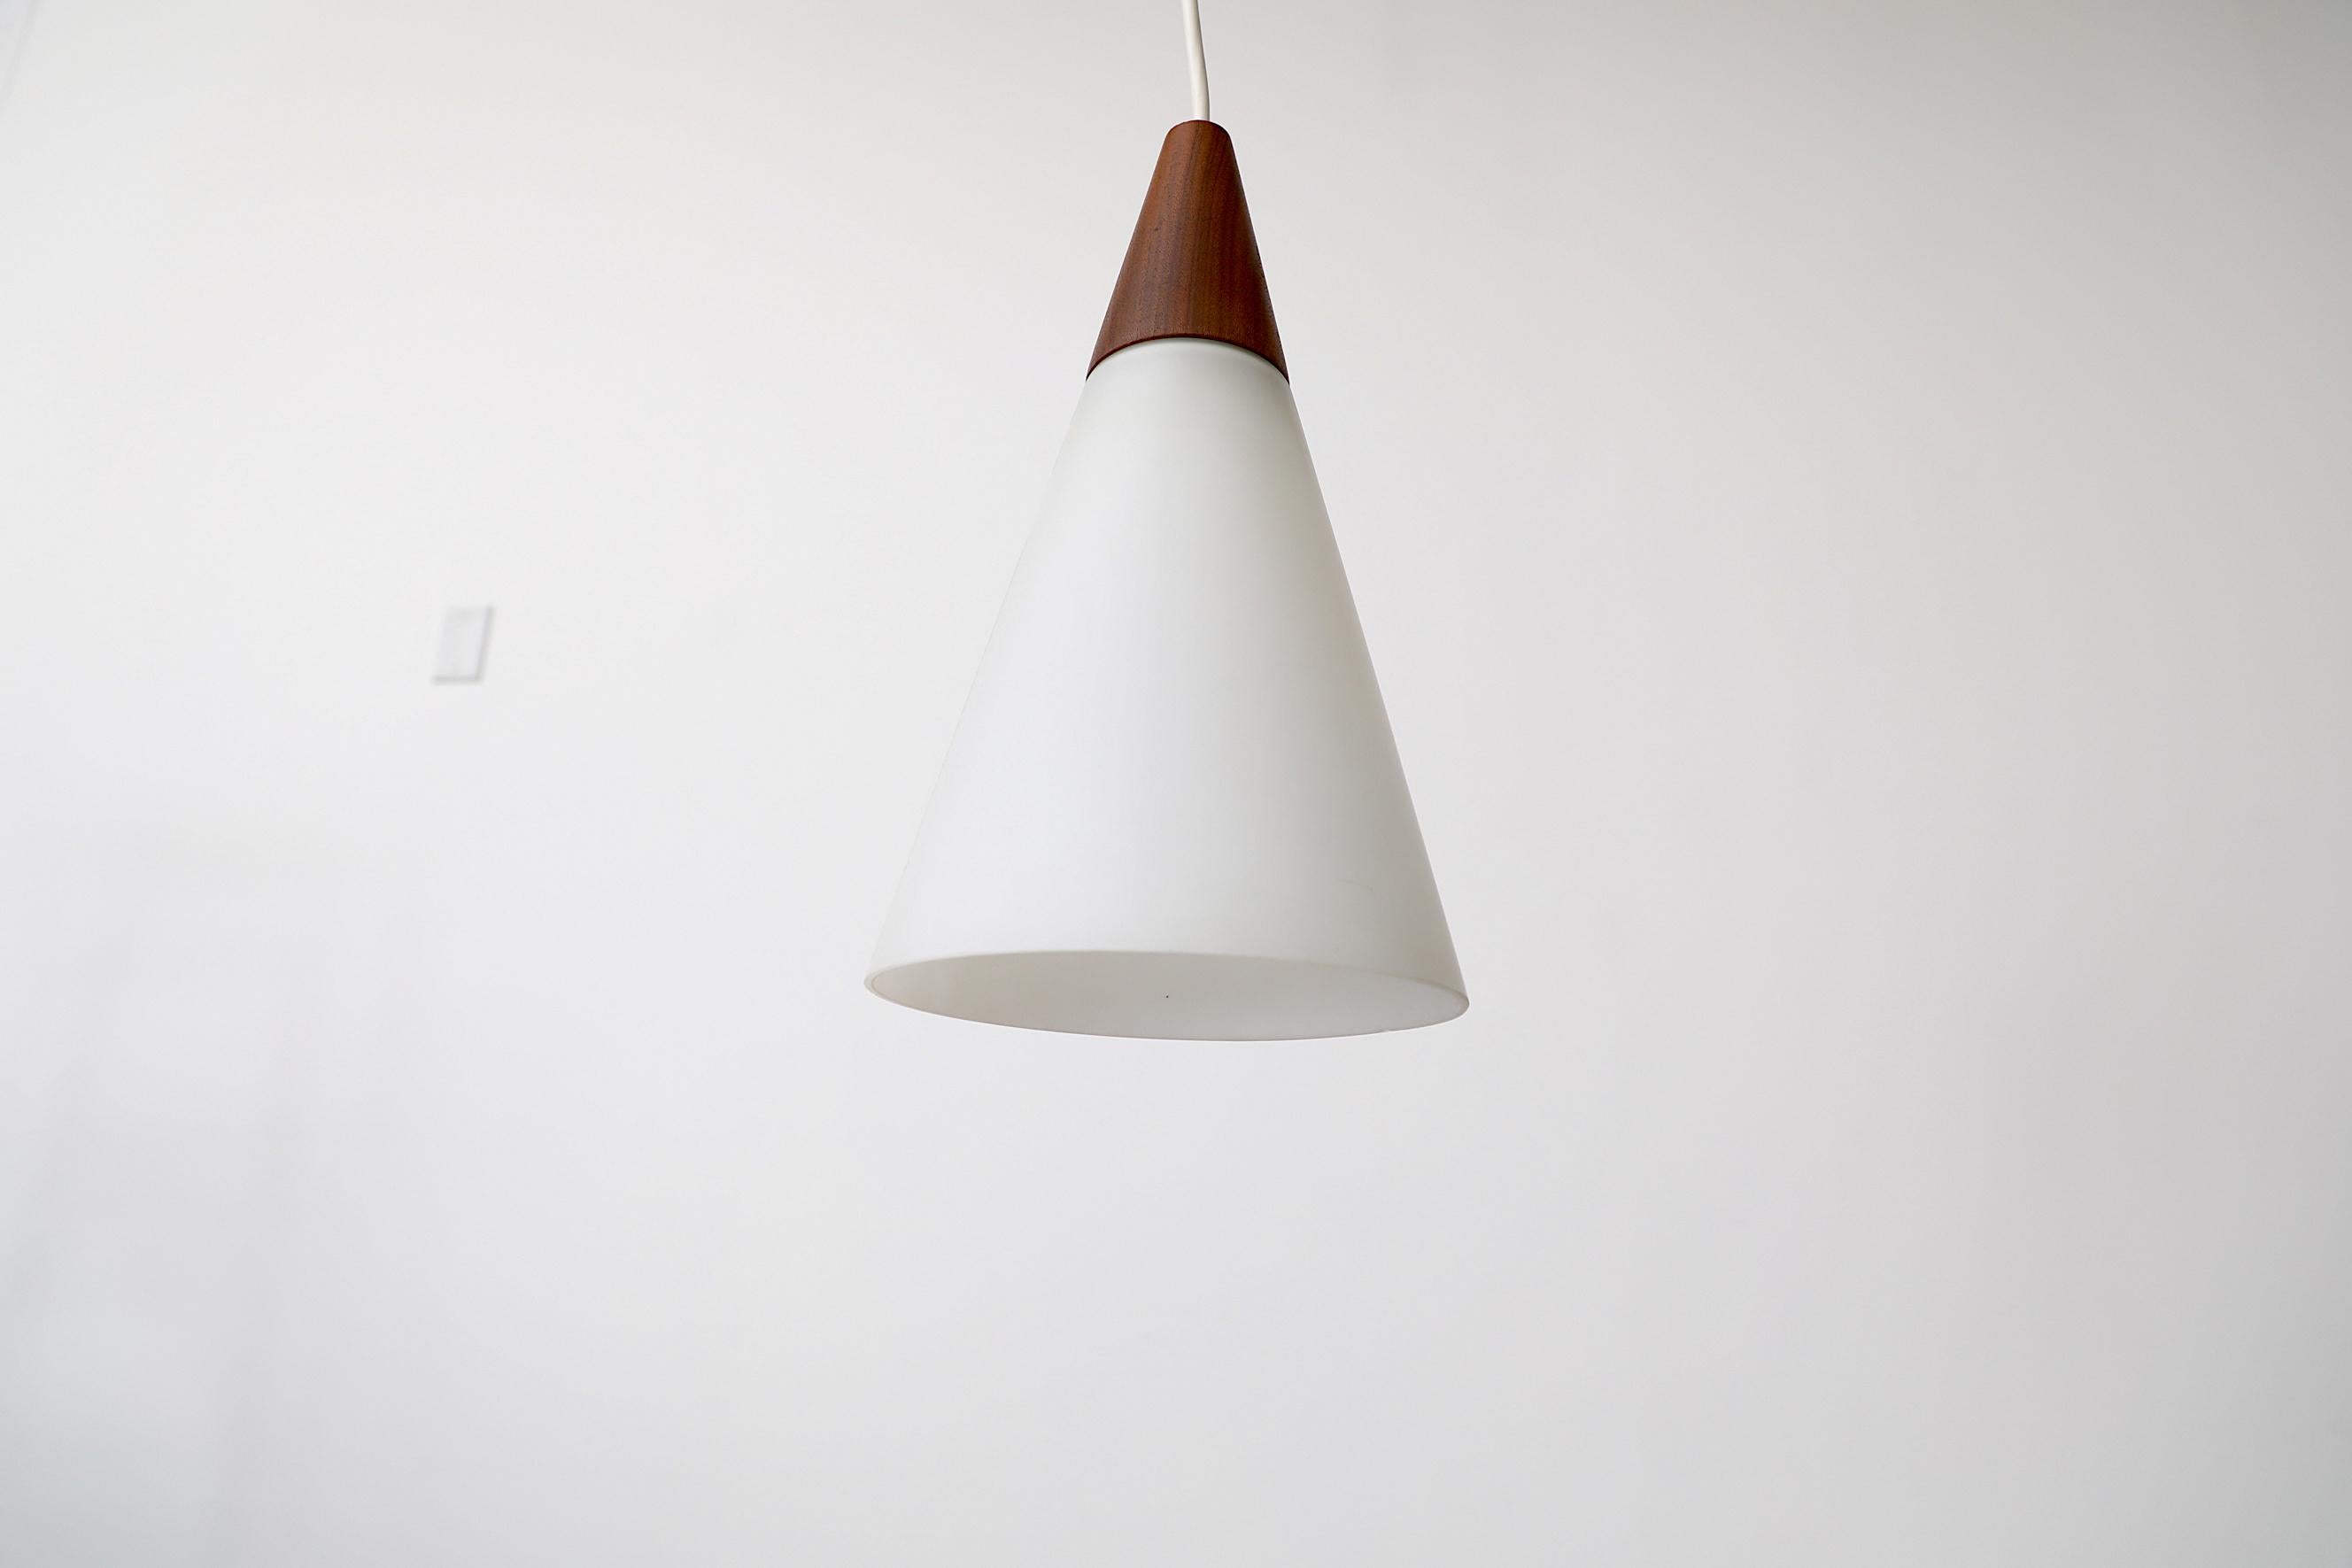 Midcentury Danish Teak and Milk Glass Cone Pendant Light with Teak Canopy In Good Condition For Sale In Los Angeles, CA